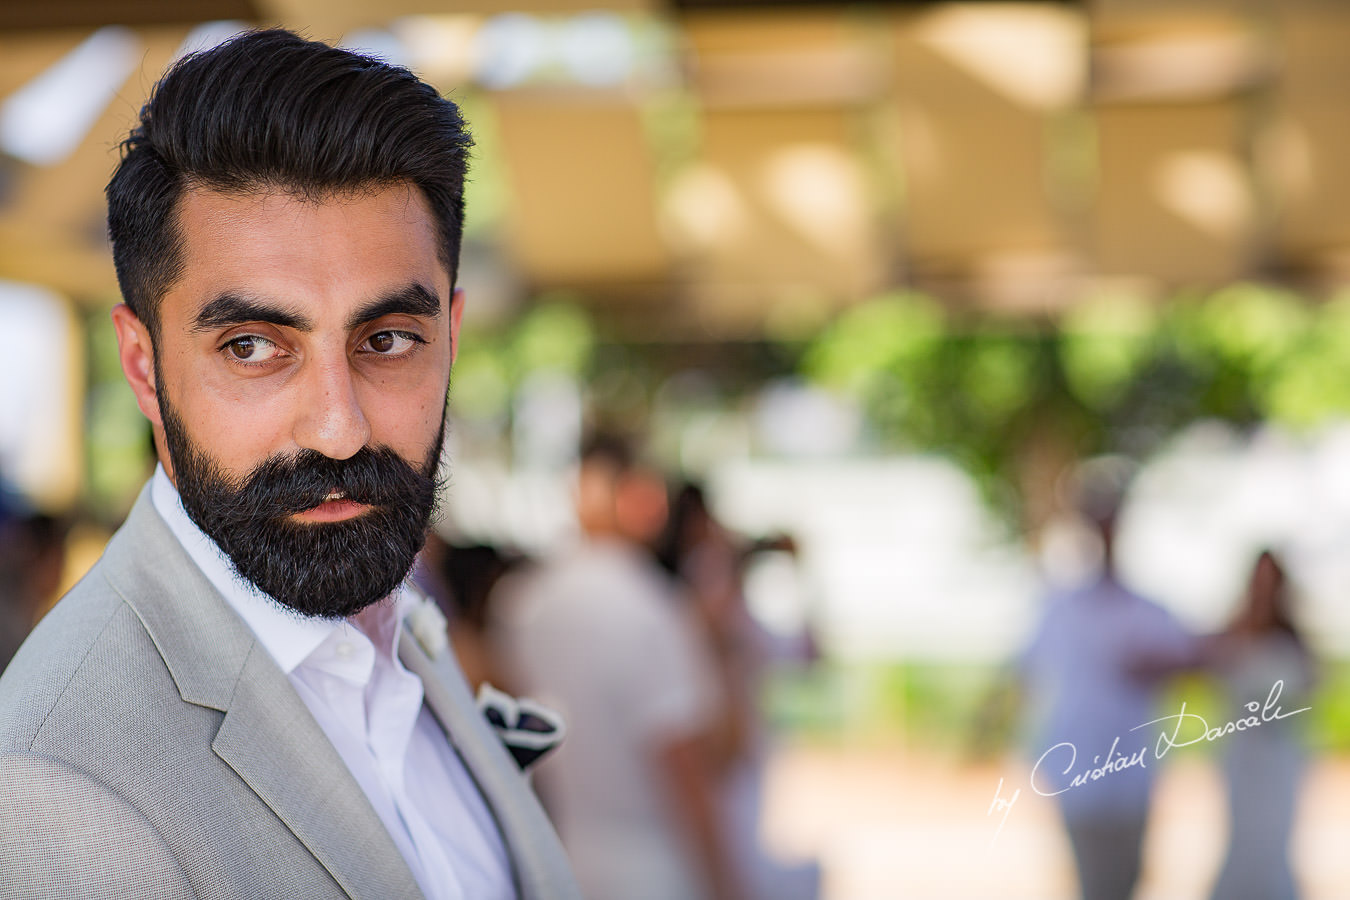 Groom impatiently waiting for his bride, moments photographed by Cristian Dascalu at Athena Beach Hotel in Paphos, Cyprus, during a symbolic wedding.